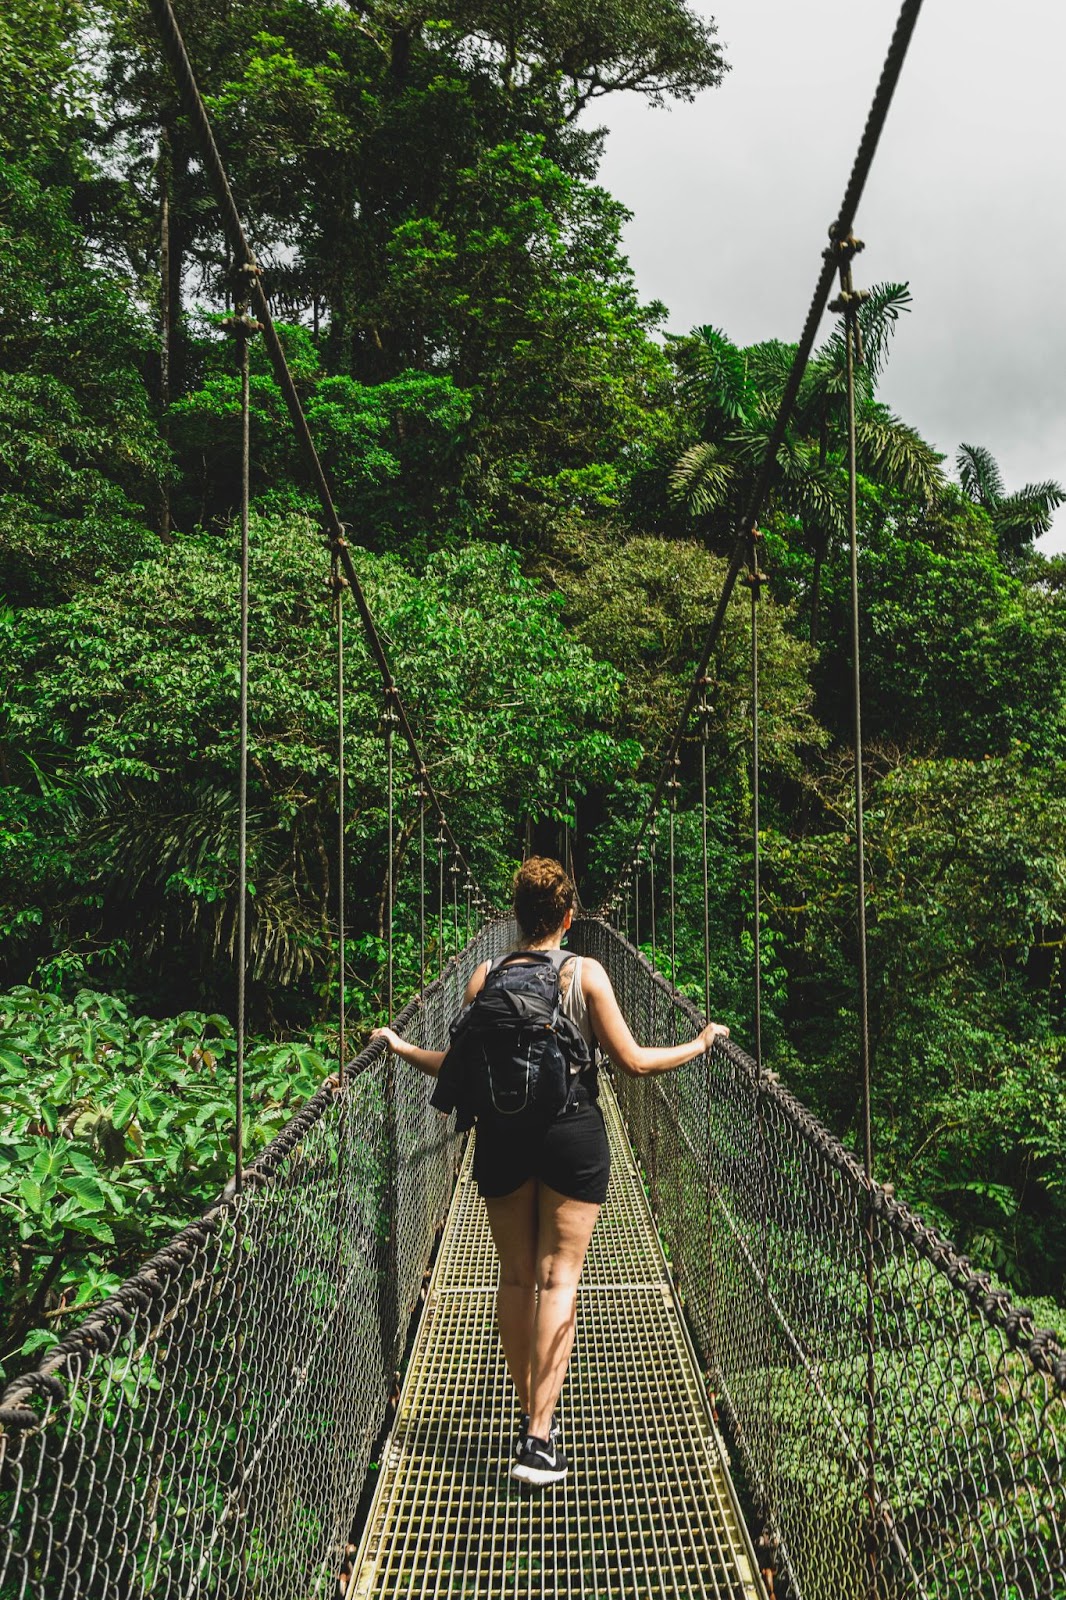 Is It Safe to Travel in Costa Rica Image: Two travelers walk across a jungle suspension bridge.